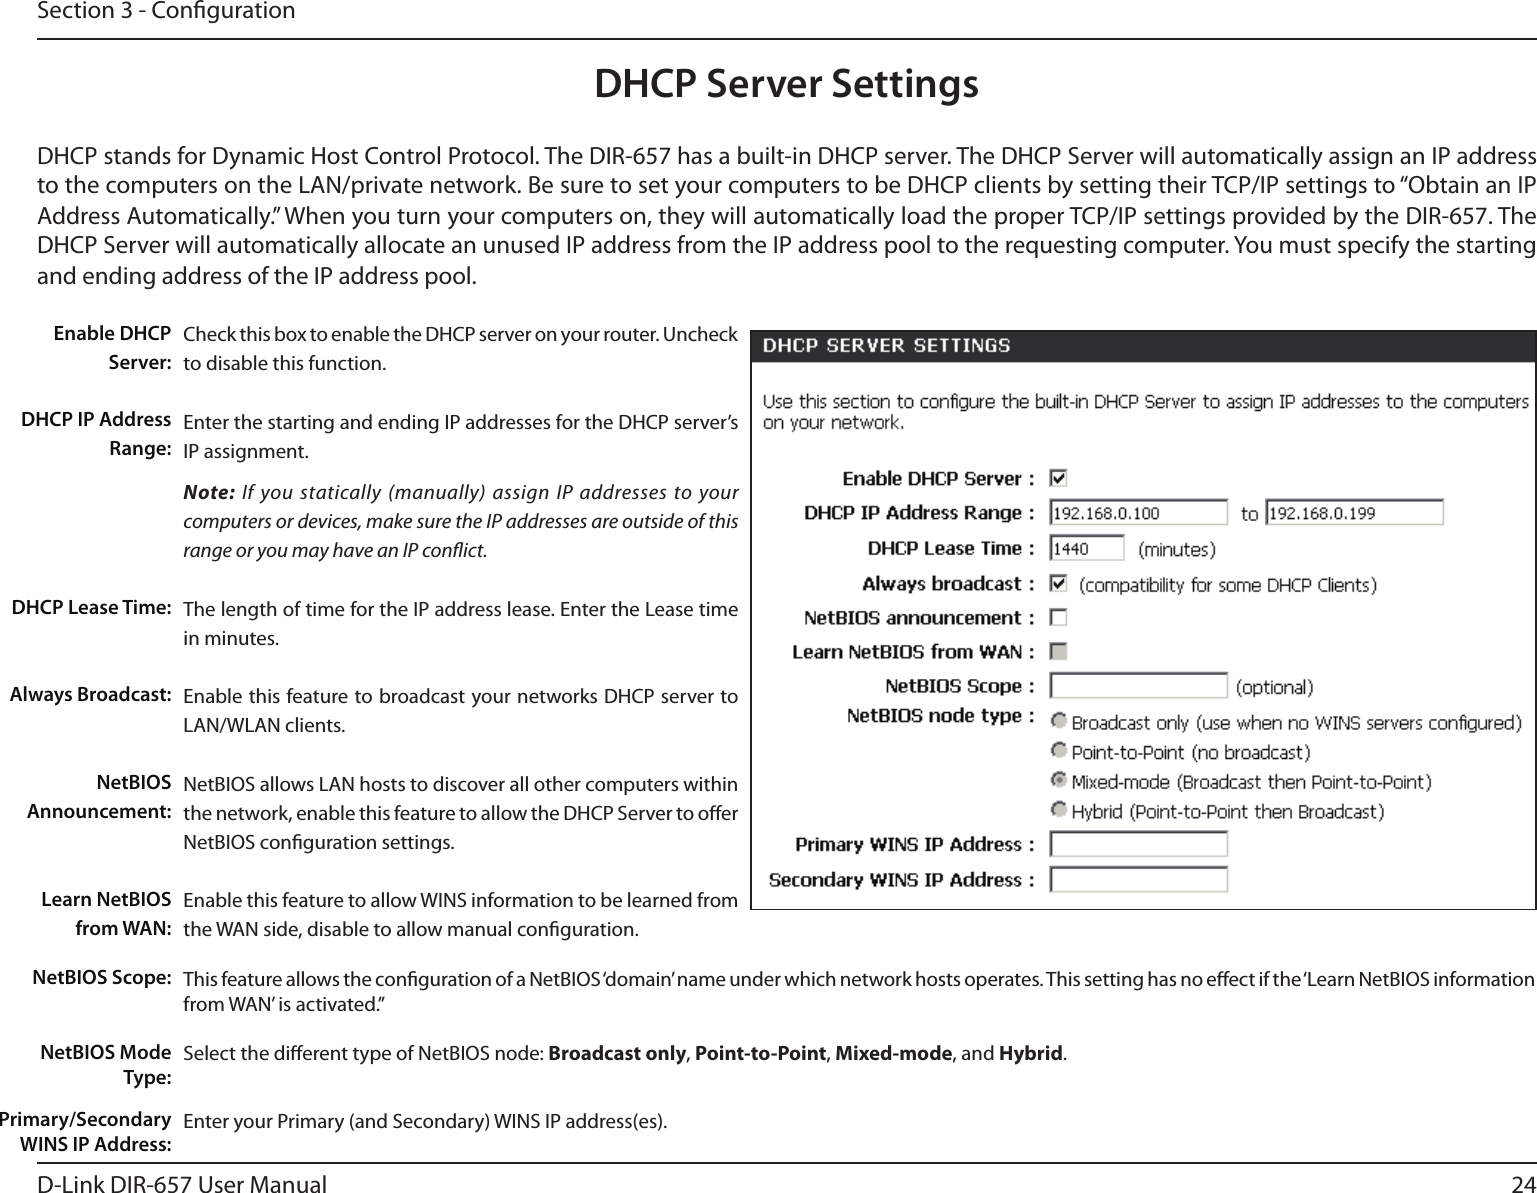 24D-Link DIR-657 User ManualSection 3 - CongurationDHCP Server SettingsDHCP stands for Dynamic Host Control Protocol. The DIR-657 has a built-in DHCP server. The DHCP Server will automatically assign an IP address to the computers on the LAN/private network. Be sure to set your computers to be DHCP clients by setting their TCP/IP settings to “Obtain an IP Address Automatically.” When you turn your computers on, they will automatically load the proper TCP/IP settings provided by the DIR-657. The DHCP Server will automatically allocate an unused IP address from the IP address pool to the requesting computer. You must specify the starting and ending address of the IP address pool.Check this box to enable the DHCP server on your router. Uncheck to disable this function.Enter the starting and ending IP addresses for the DHCP server’s IP assignment.Note: If you statically (manually) assign IP addresses to your computers or devices, make sure the IP addresses are outside of this range or you may have an IP conict. The length of time for the IP address lease. Enter the Lease time in minutes.Enable this feature to broadcast your networks DHCP server to LAN/WLAN clients.NetBIOS allows LAN hosts to discover all other computers within the network, enable this feature to allow the DHCP Server to oer NetBIOS conguration settings.Enable this feature to allow WINS information to be learned from the WAN side, disable to allow manual conguration.This feature allows the conguration of a NetBIOS ‘domain’ name under which network hosts operates. This setting has no eect if the ‘Learn NetBIOS information from WAN’ is activated.”Select the dierent type of NetBIOS node: Broadcast only, Point-to-Point, Mixed-mode, and Hybrid.Enter your Primary (and Secondary) WINS IP address(es).Enable DHCP Server:DHCP IP Address Range:DHCP Lease Time:Always Broadcast:NetBIOS Announcement:Learn NetBIOS from WAN:NetBIOS Scope:NetBIOS Mode Type:Primary/Secondary WINS IP Address: